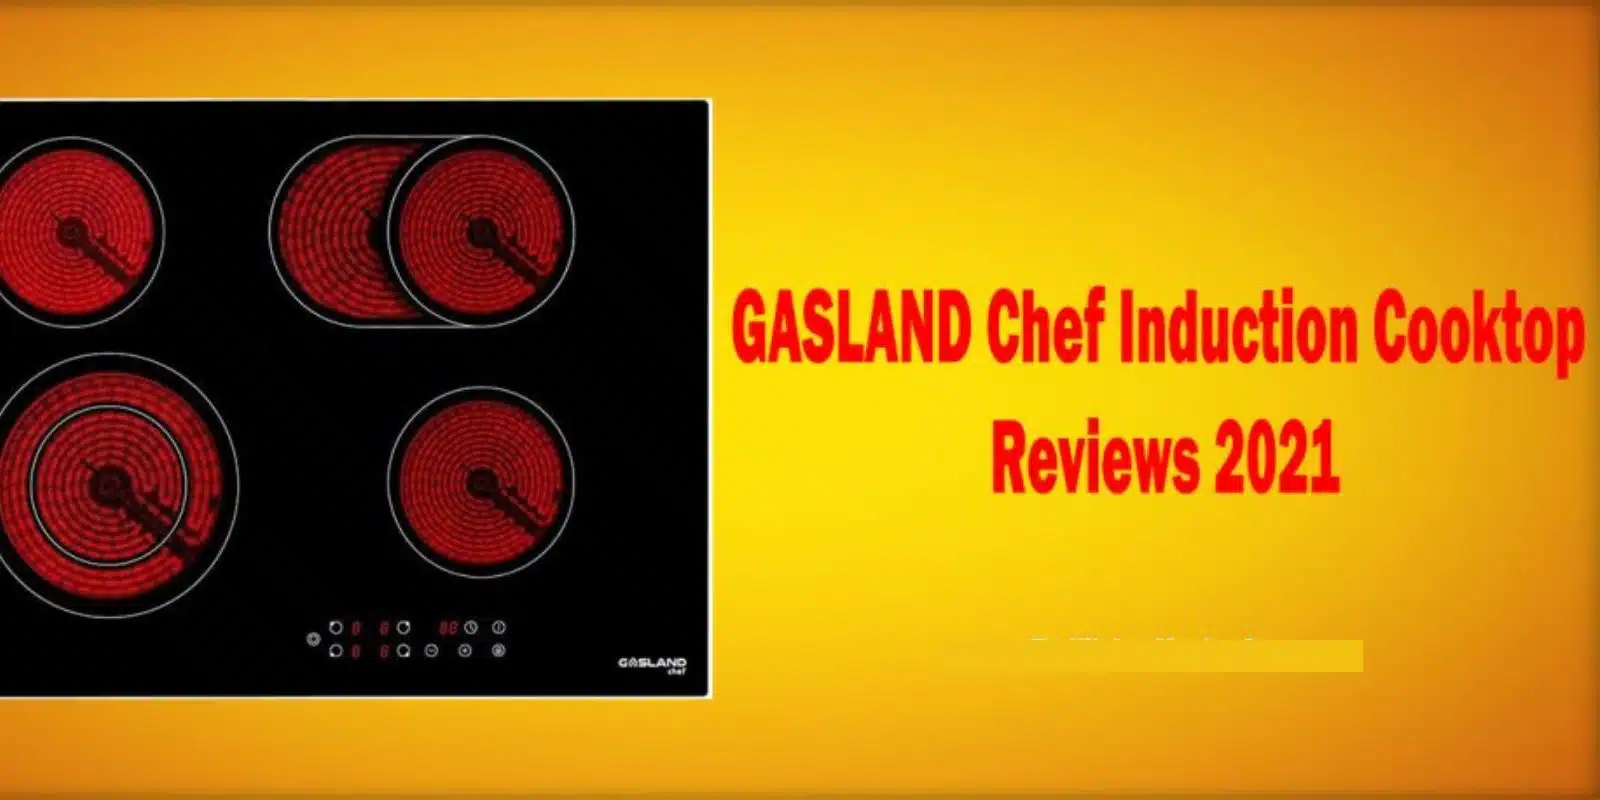 GASLAND Chef Induction Cooktop Reviews – 2021